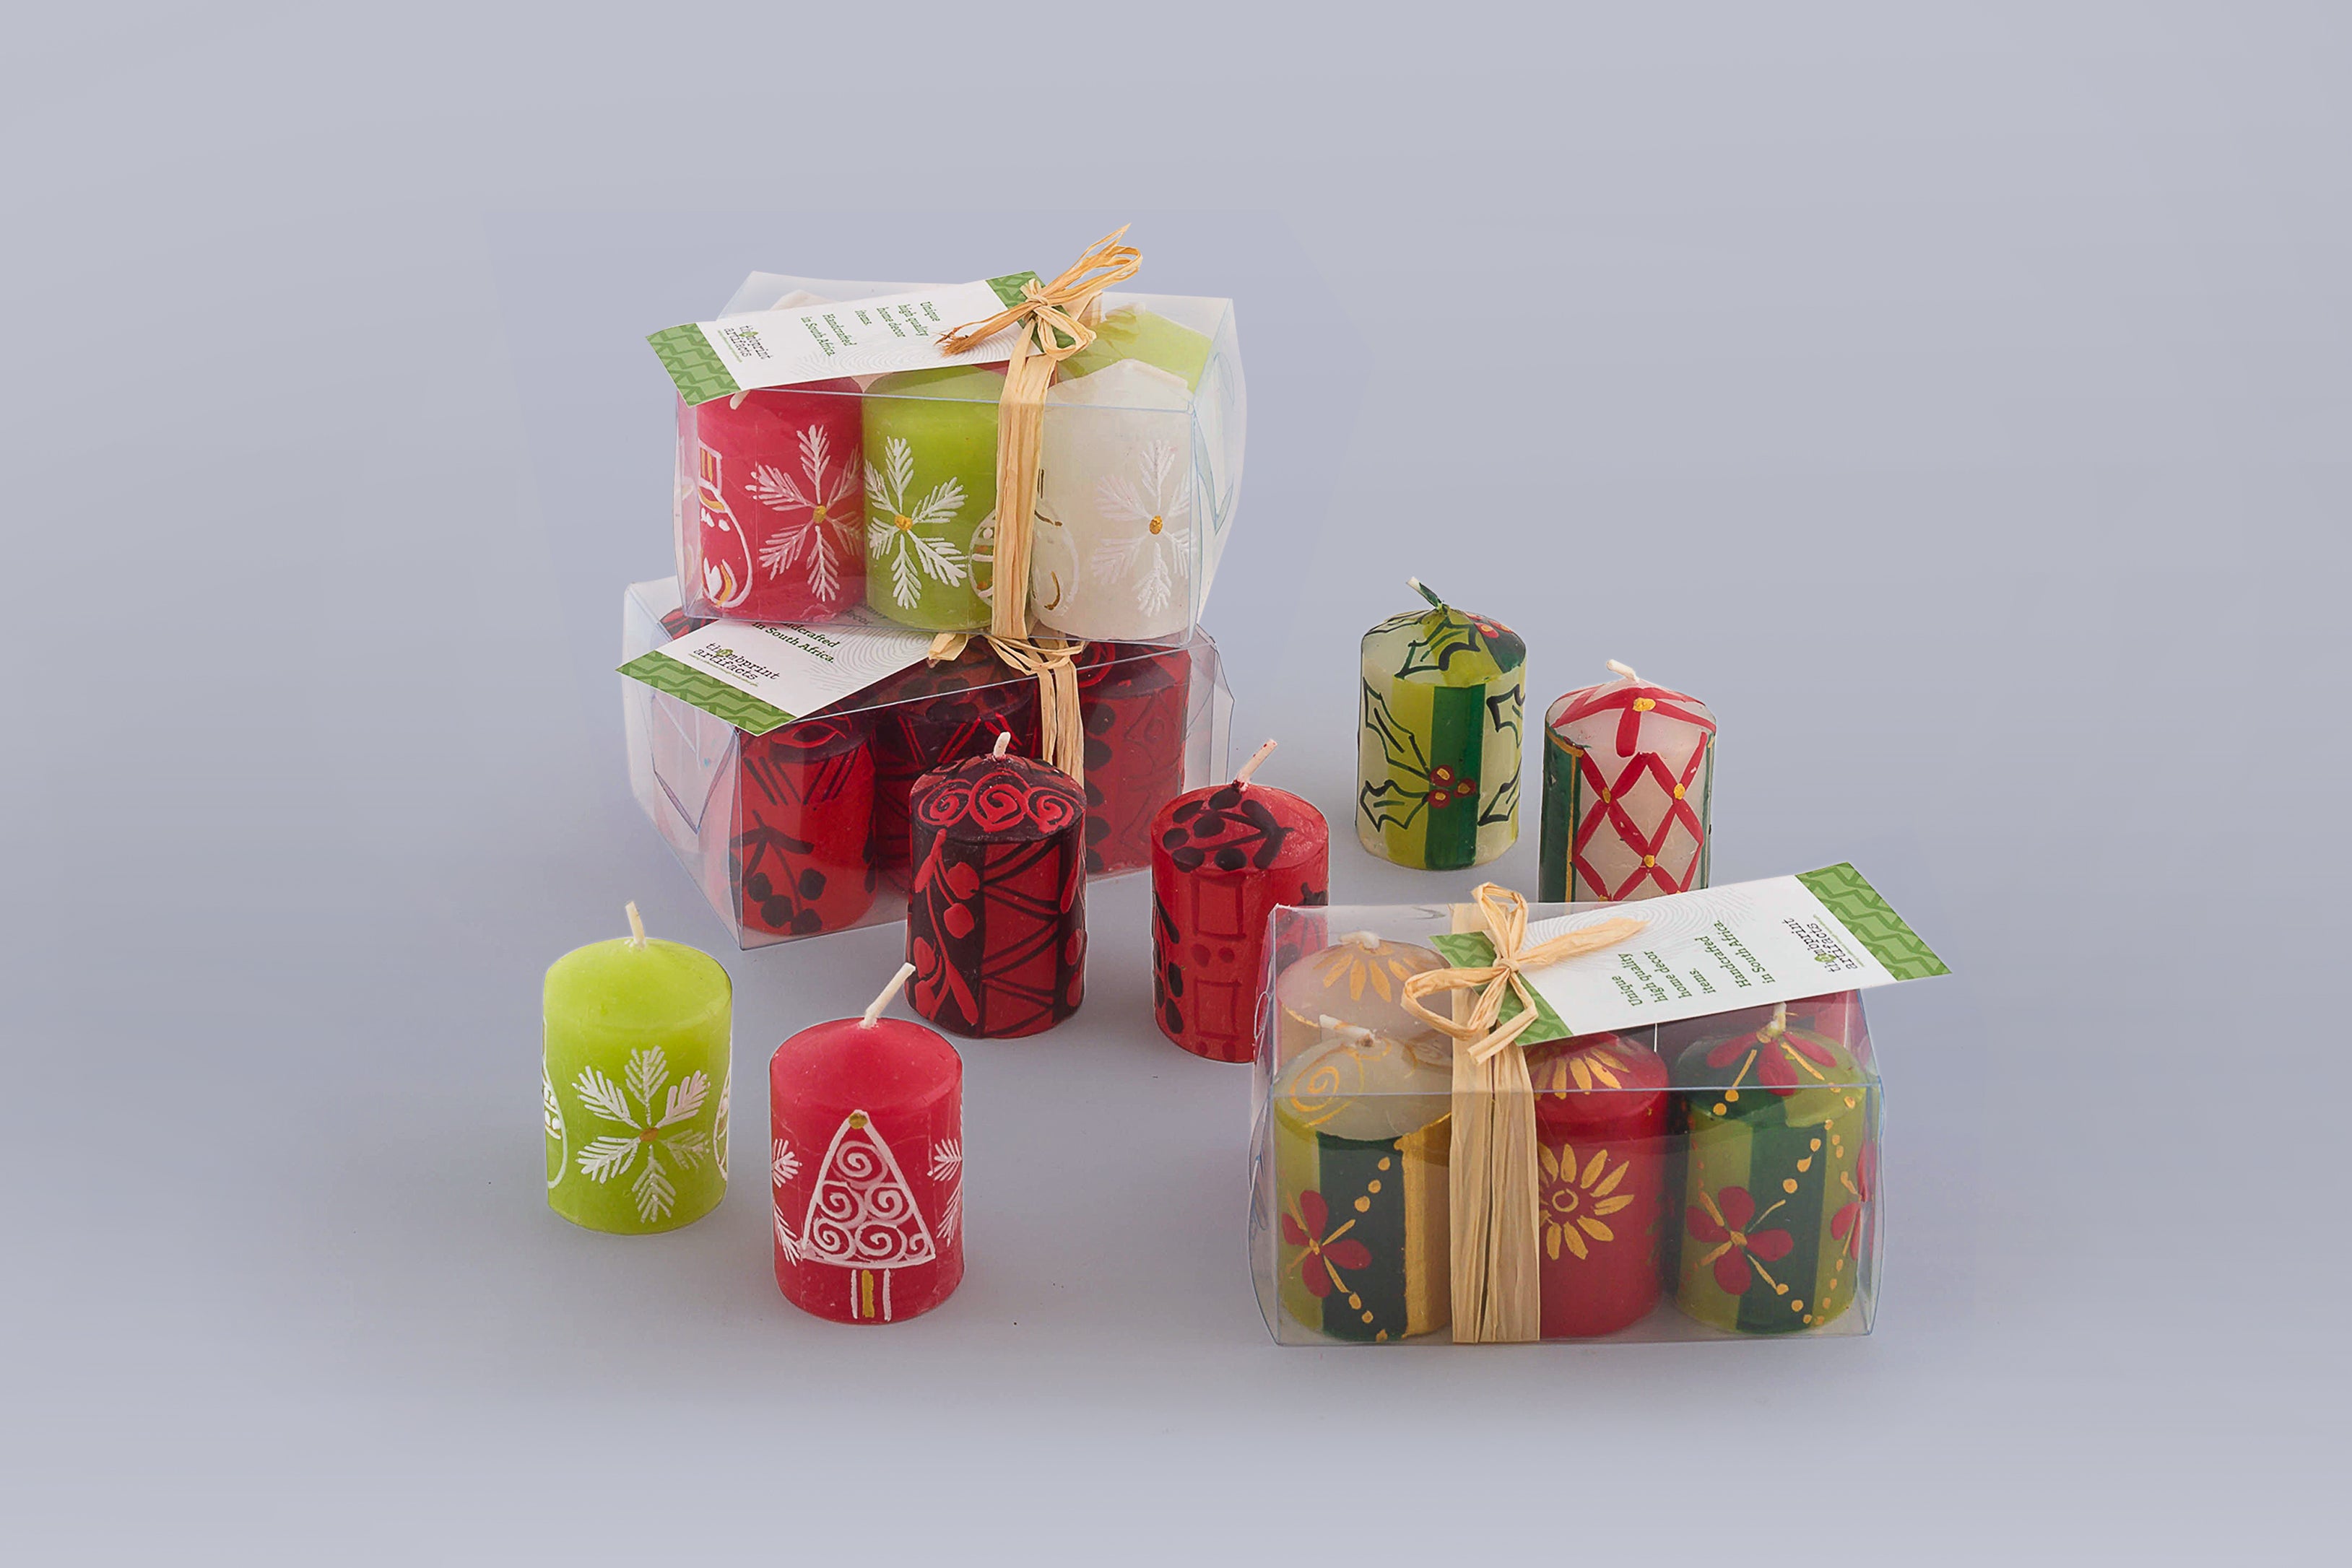 Votive 2" candles in Whimsy Christmas, Berry Blaze, and traditional Christmas to show that they look great together - so mix and match! The photo shows the presentation of the 6-pack box with story tag.